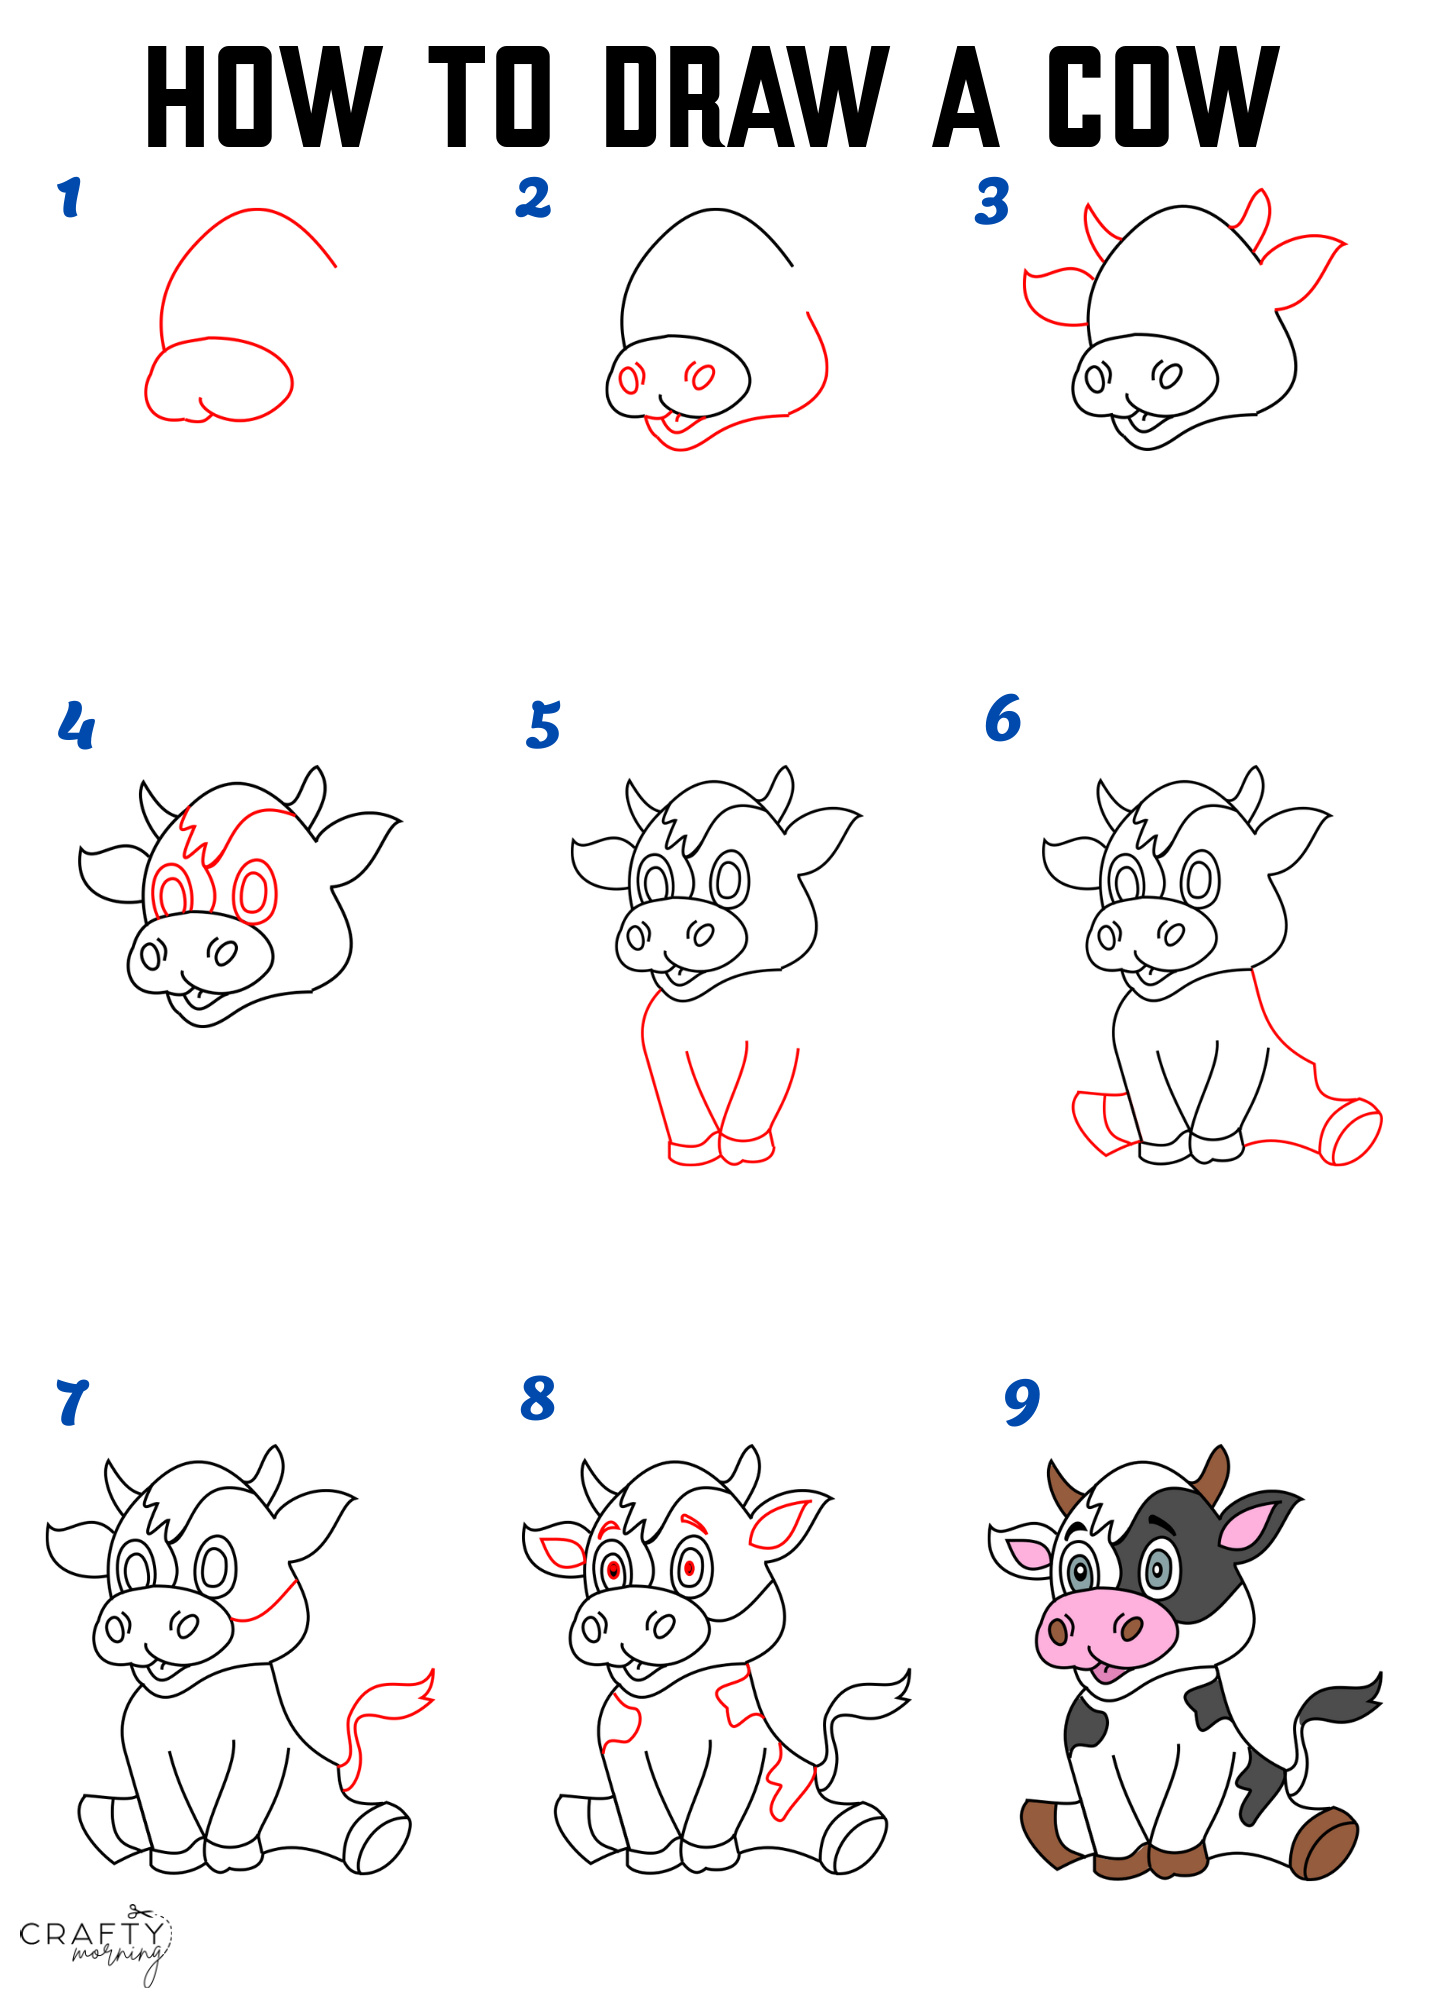 Cow Drawing Tutorial - How to draw Cow step by step-saigonsouth.com.vn